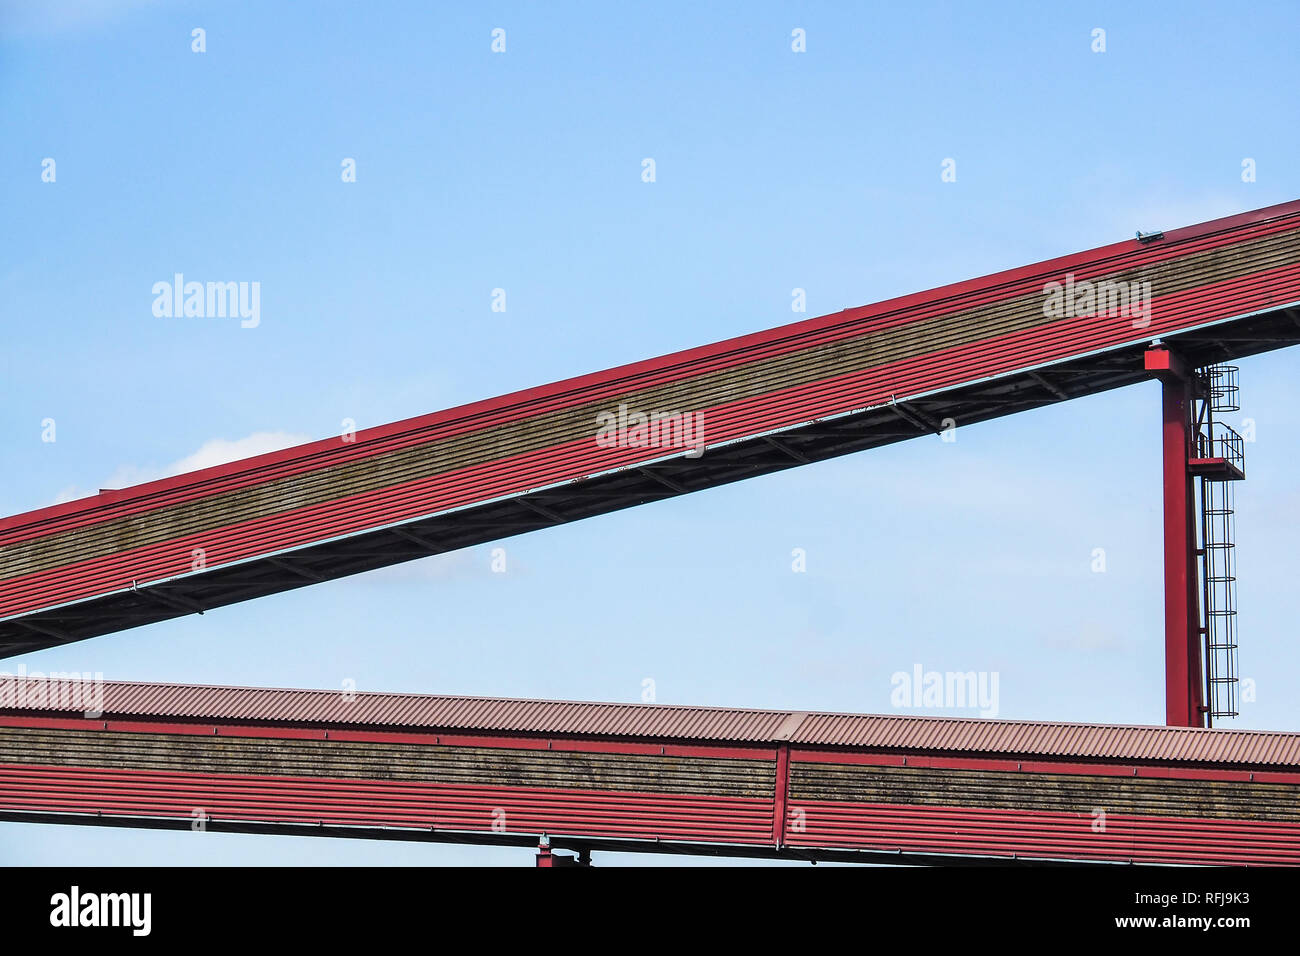 Abstract image of a conveyor system in the port of Rostock Warnemuende Stock Photo